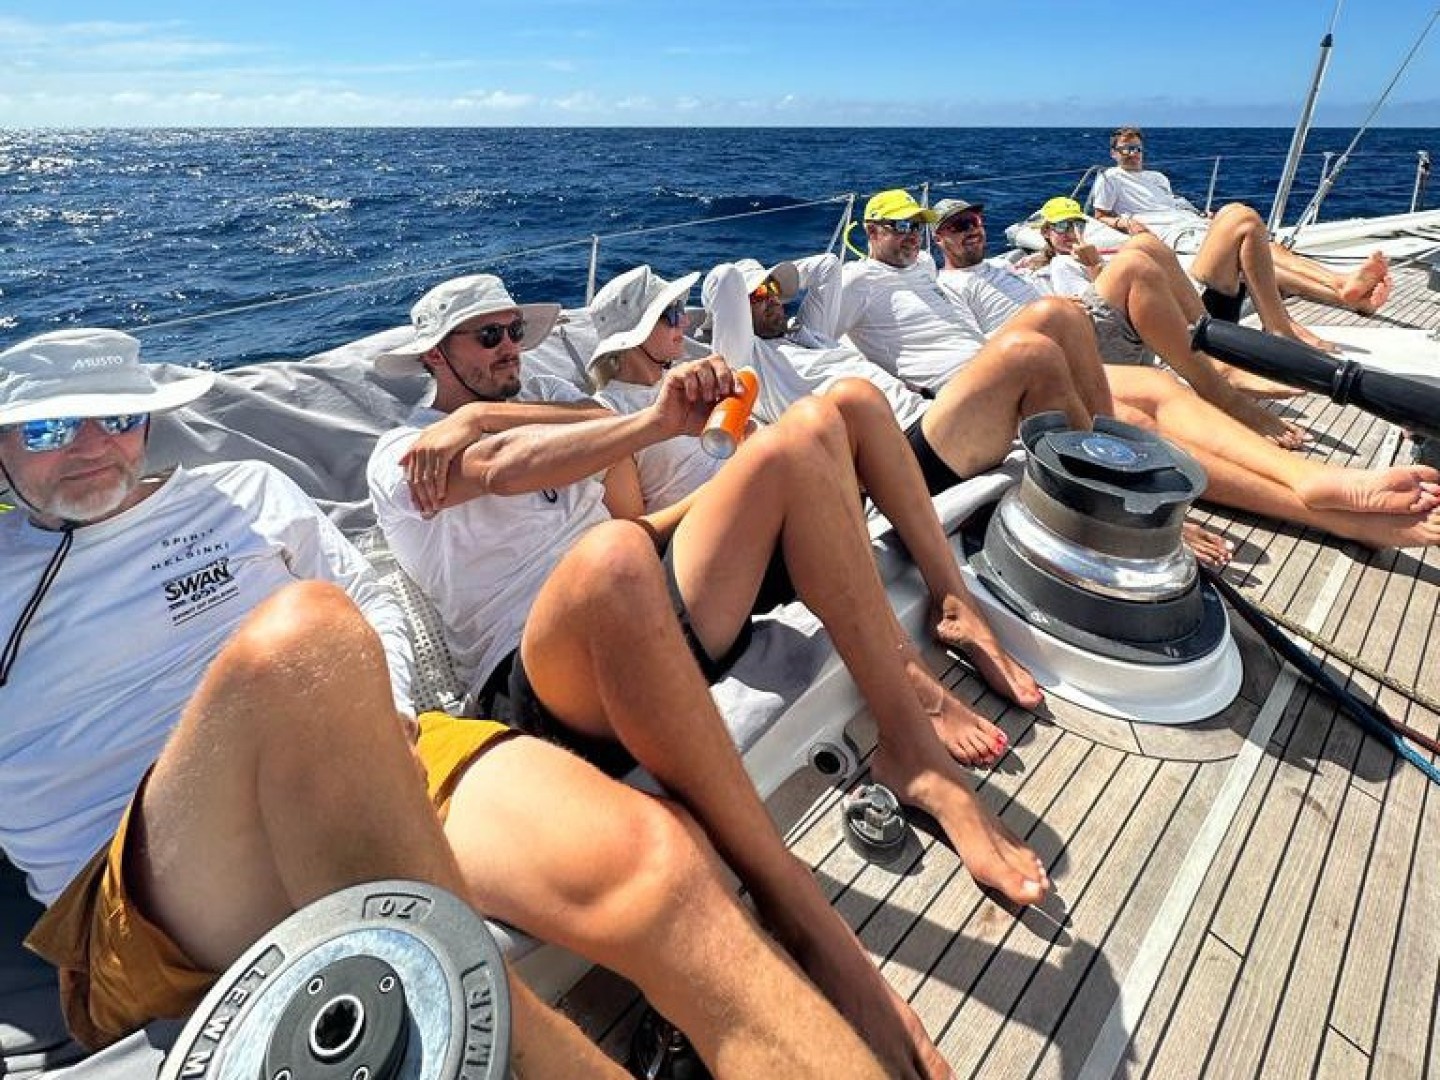 How hard is it to beat Pen Duick VI? The crew of Spirit of Helsinki chilling out after grabbing the lead. McIntyre OCEAN GLOBE 2023 – COPYRIGHT FREE for Editorial Use. Credit: OGR2023/Spirit of Helsinki